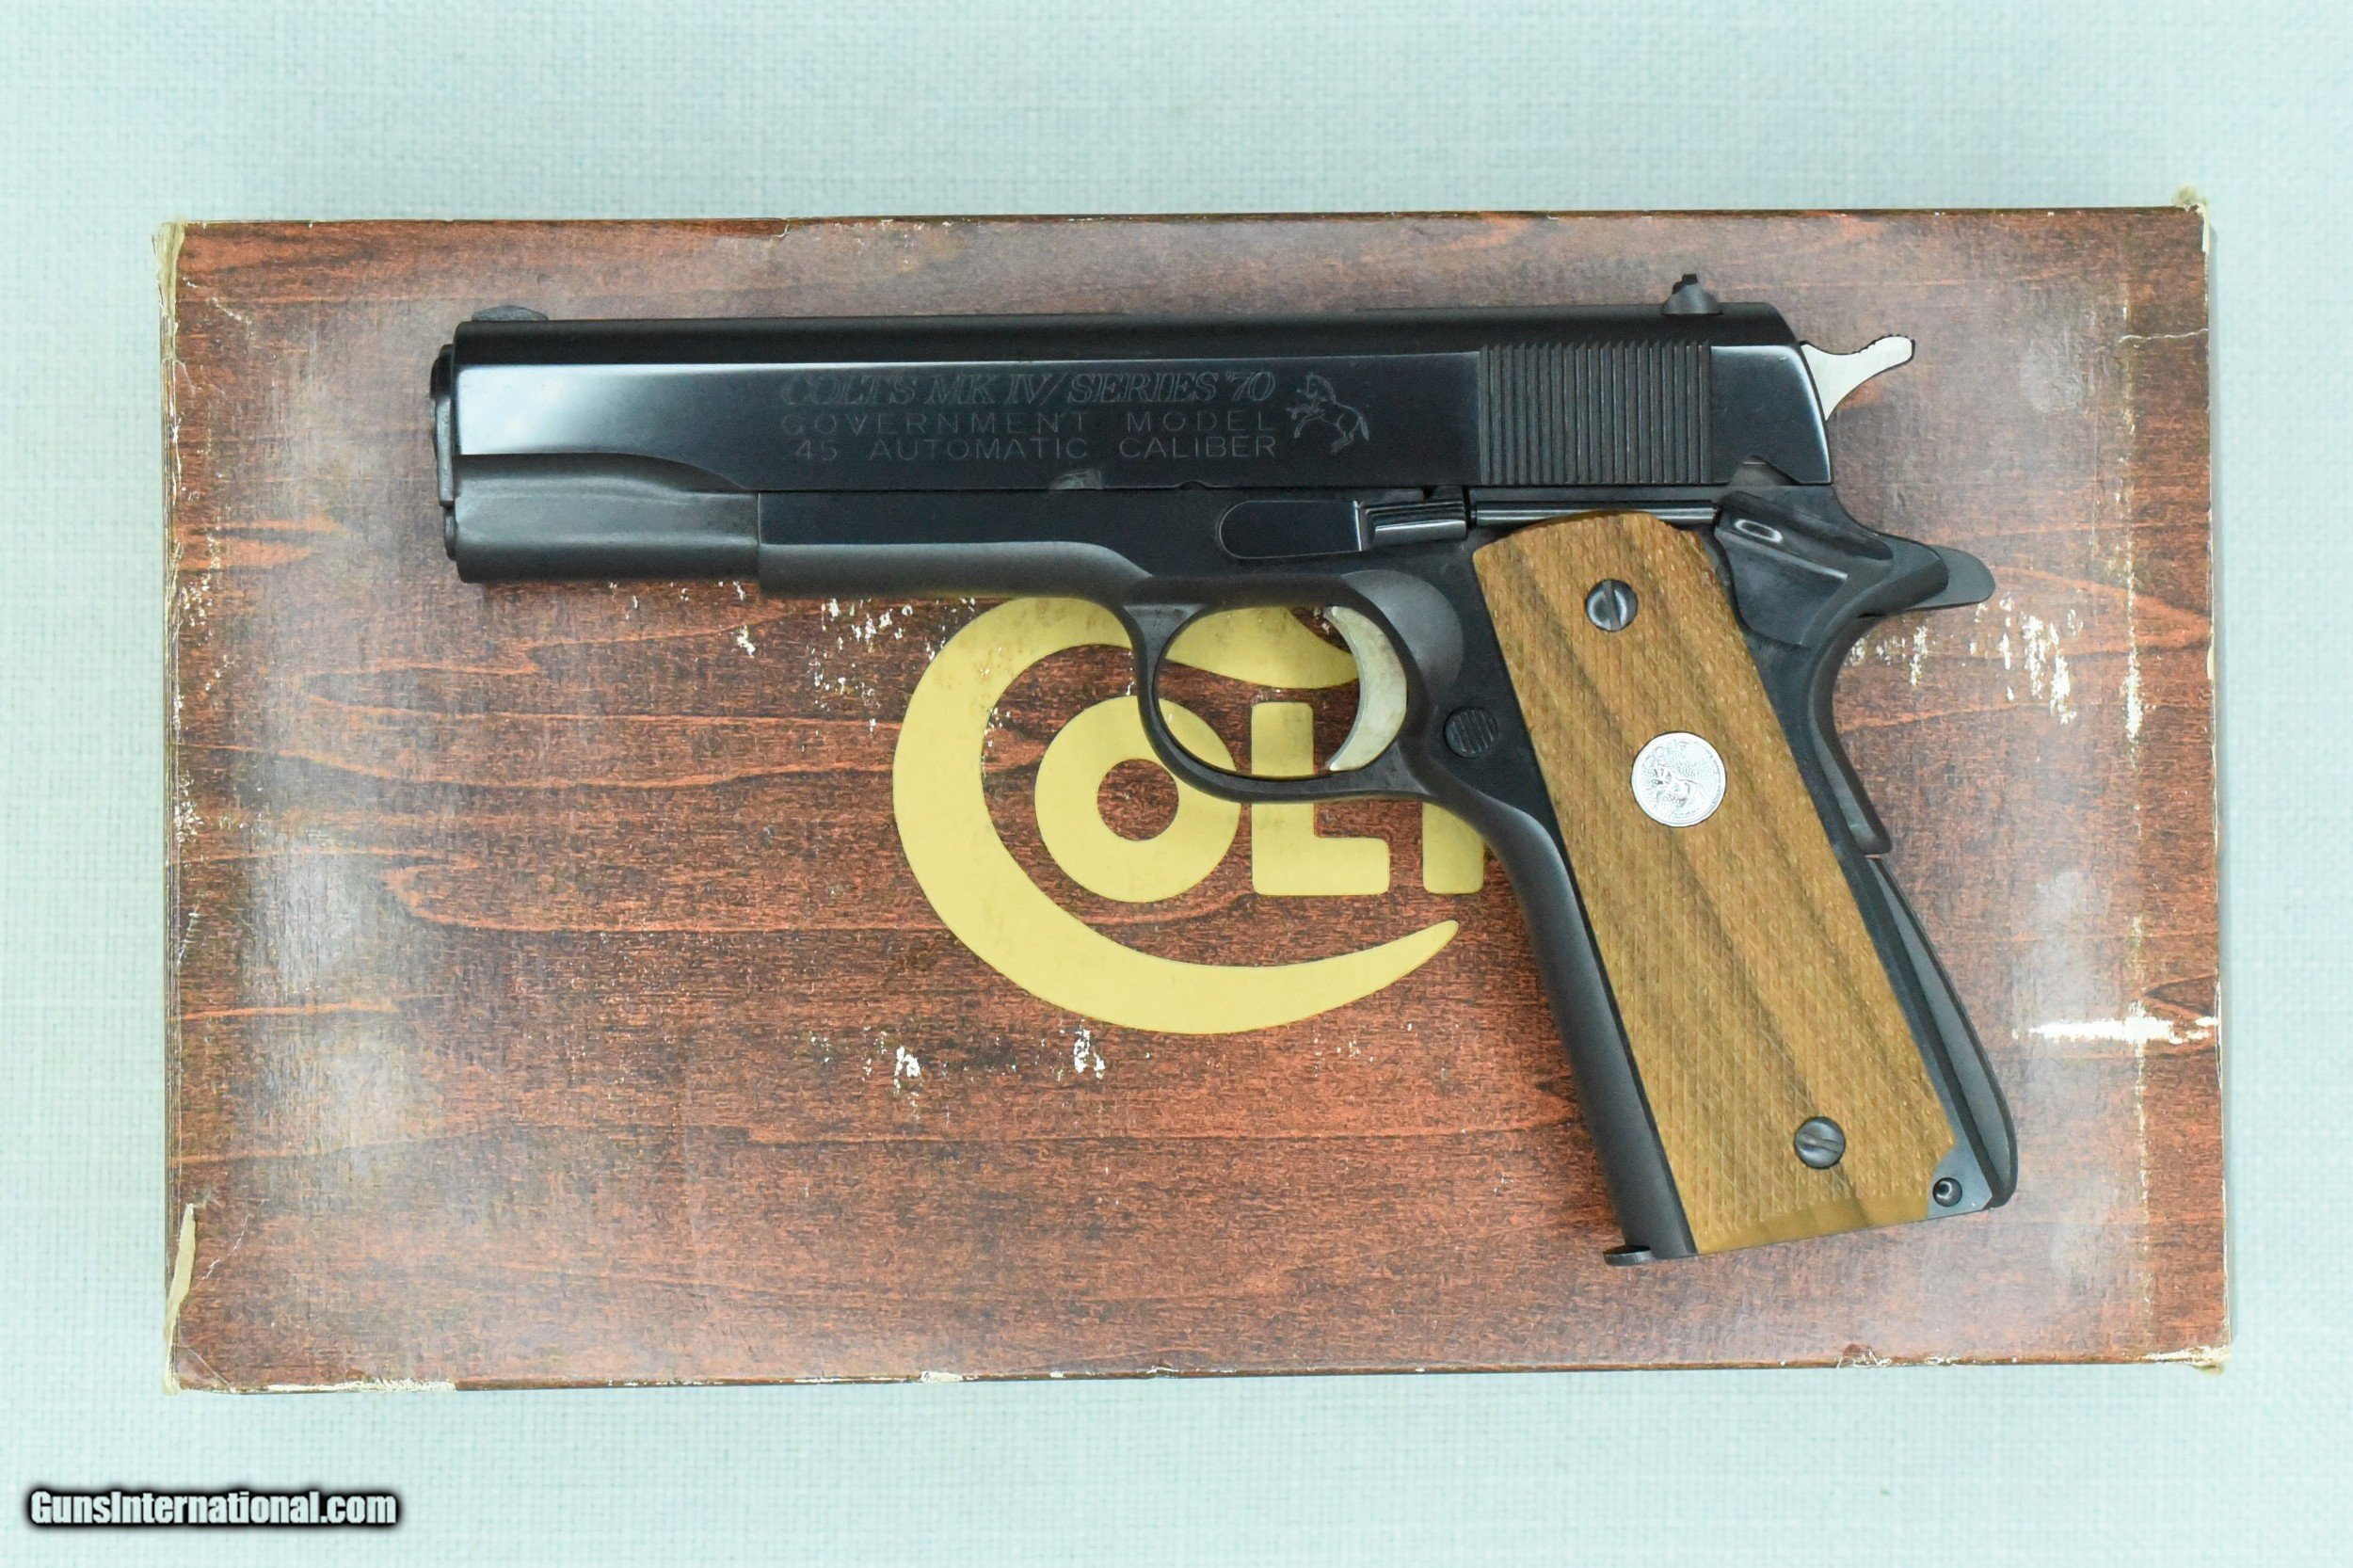 1975 Stainless Colt Mk.IV Series 70 Government Model .45 ACP Pistol w/ Box  ** Minty & Appears Unfired! ** SOLD